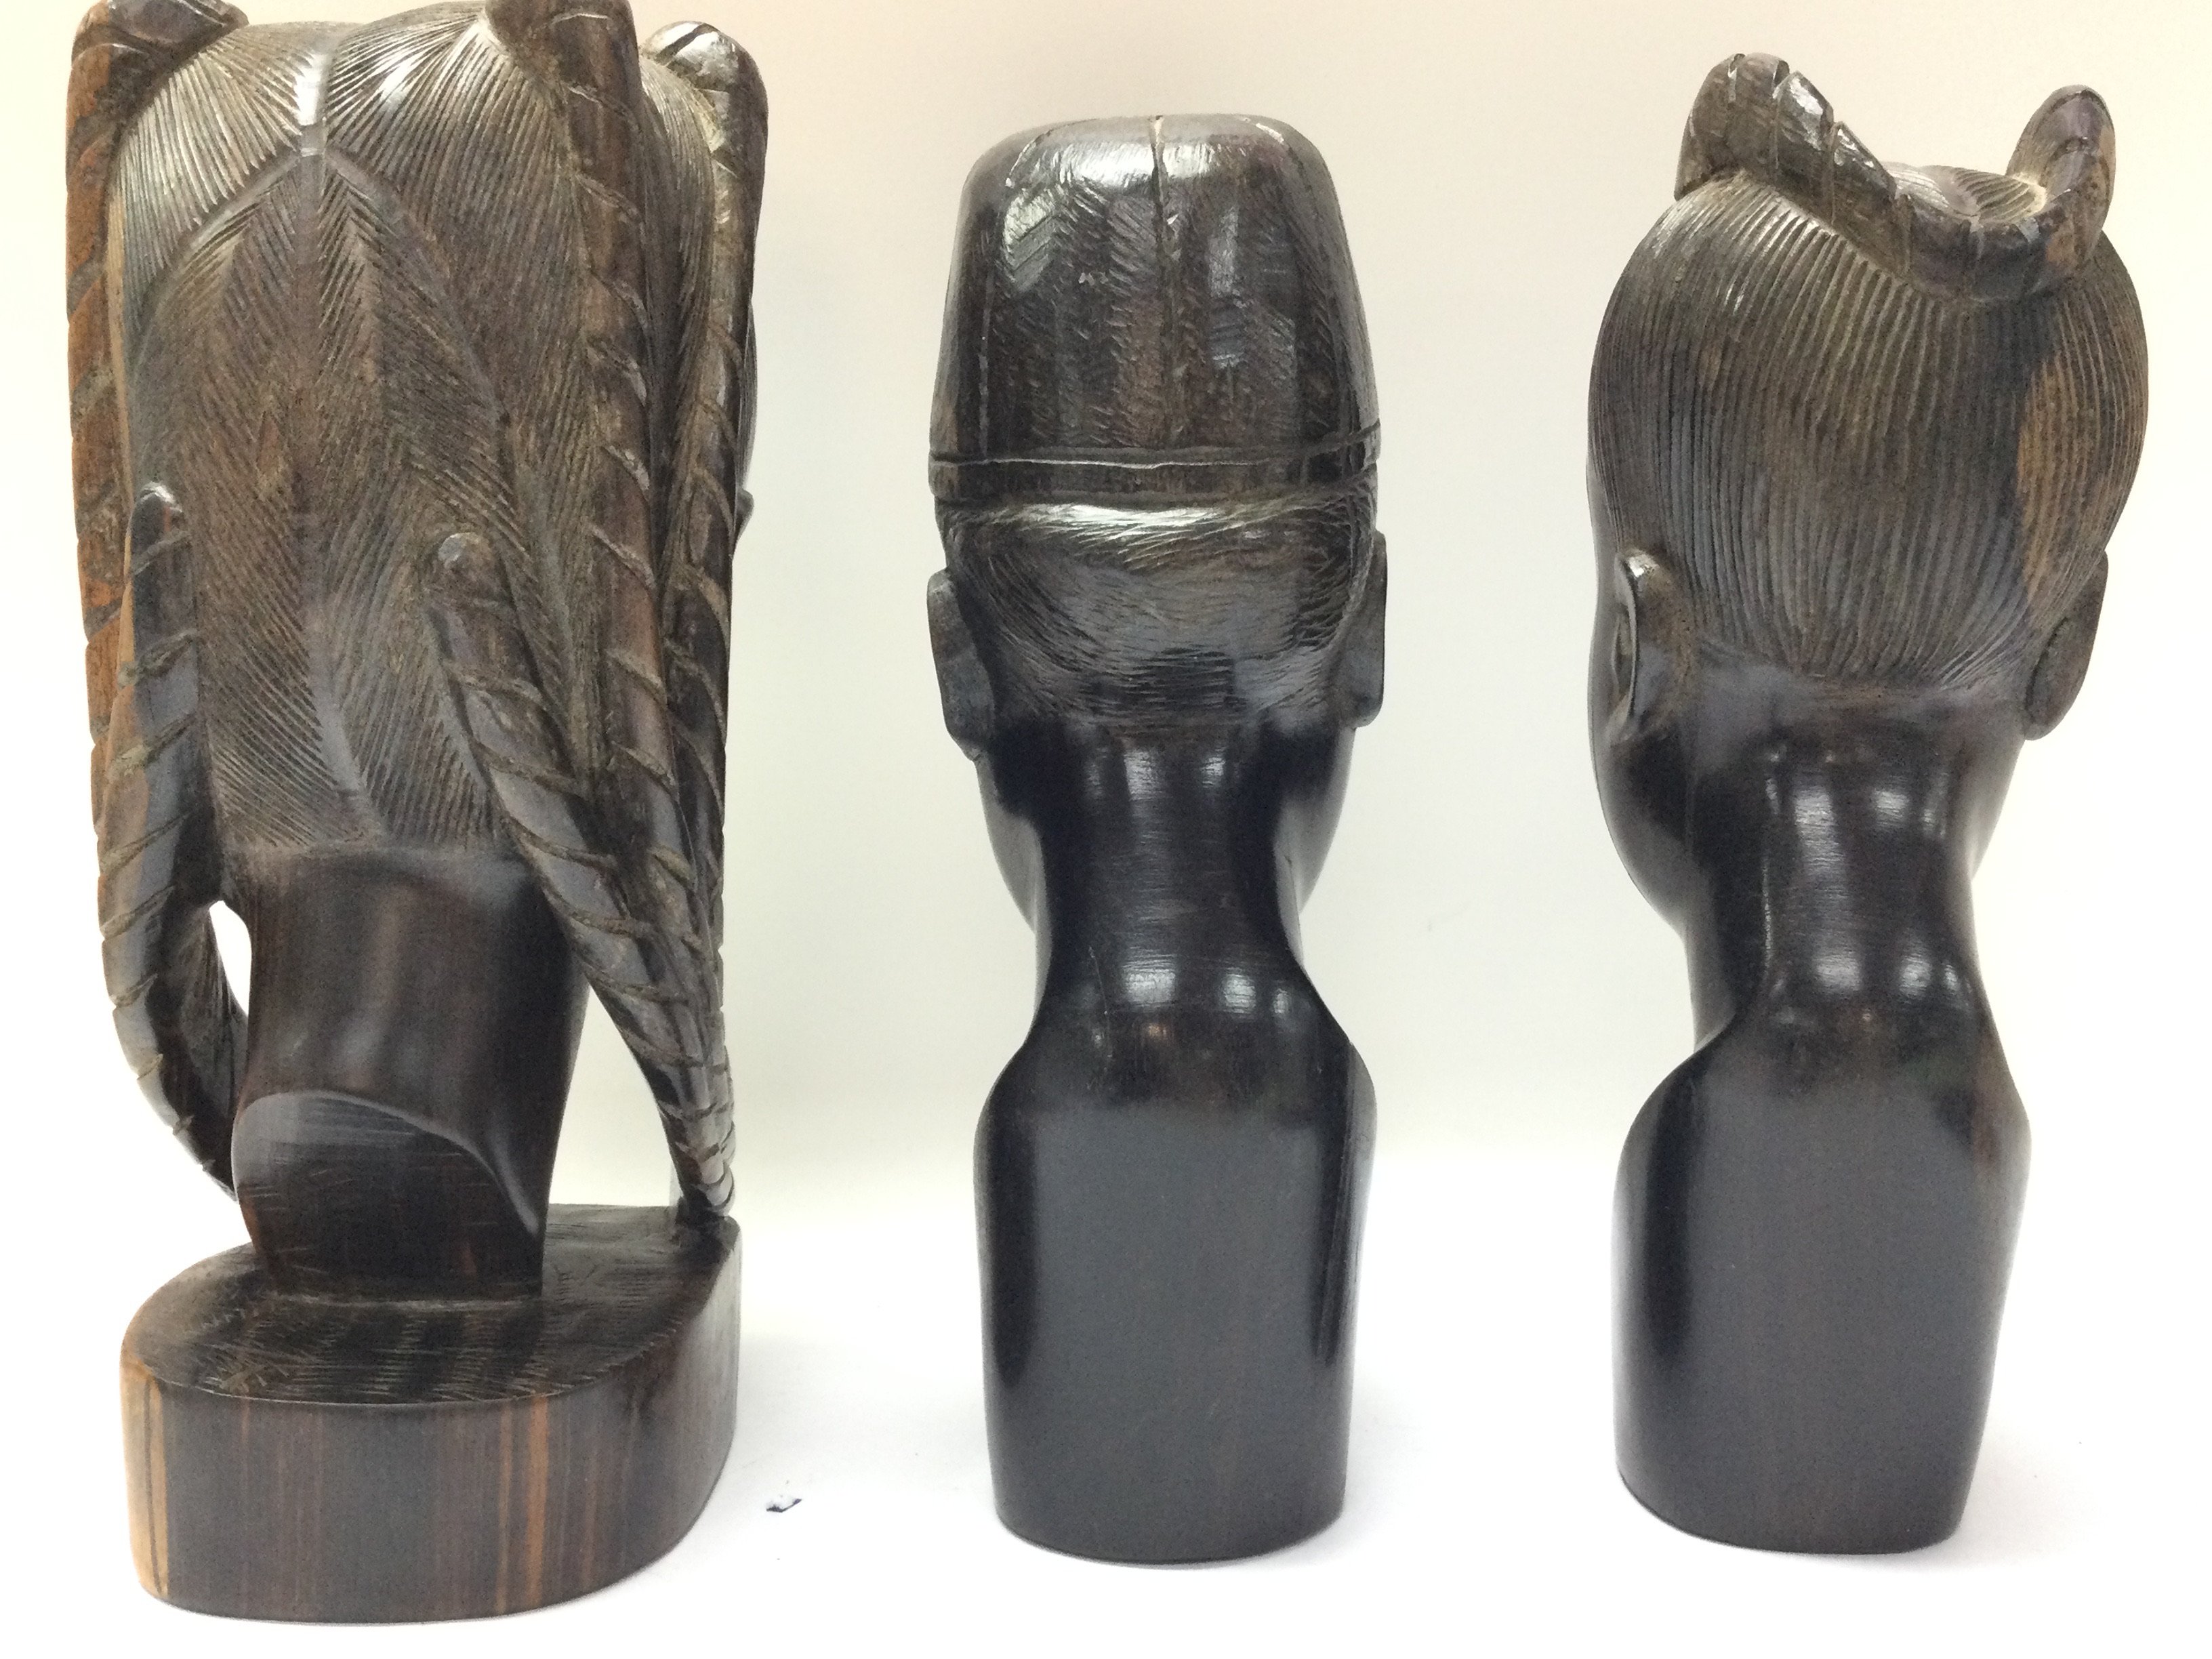 Carved wooden tribal head statues, 24cm tall appro - Image 2 of 2